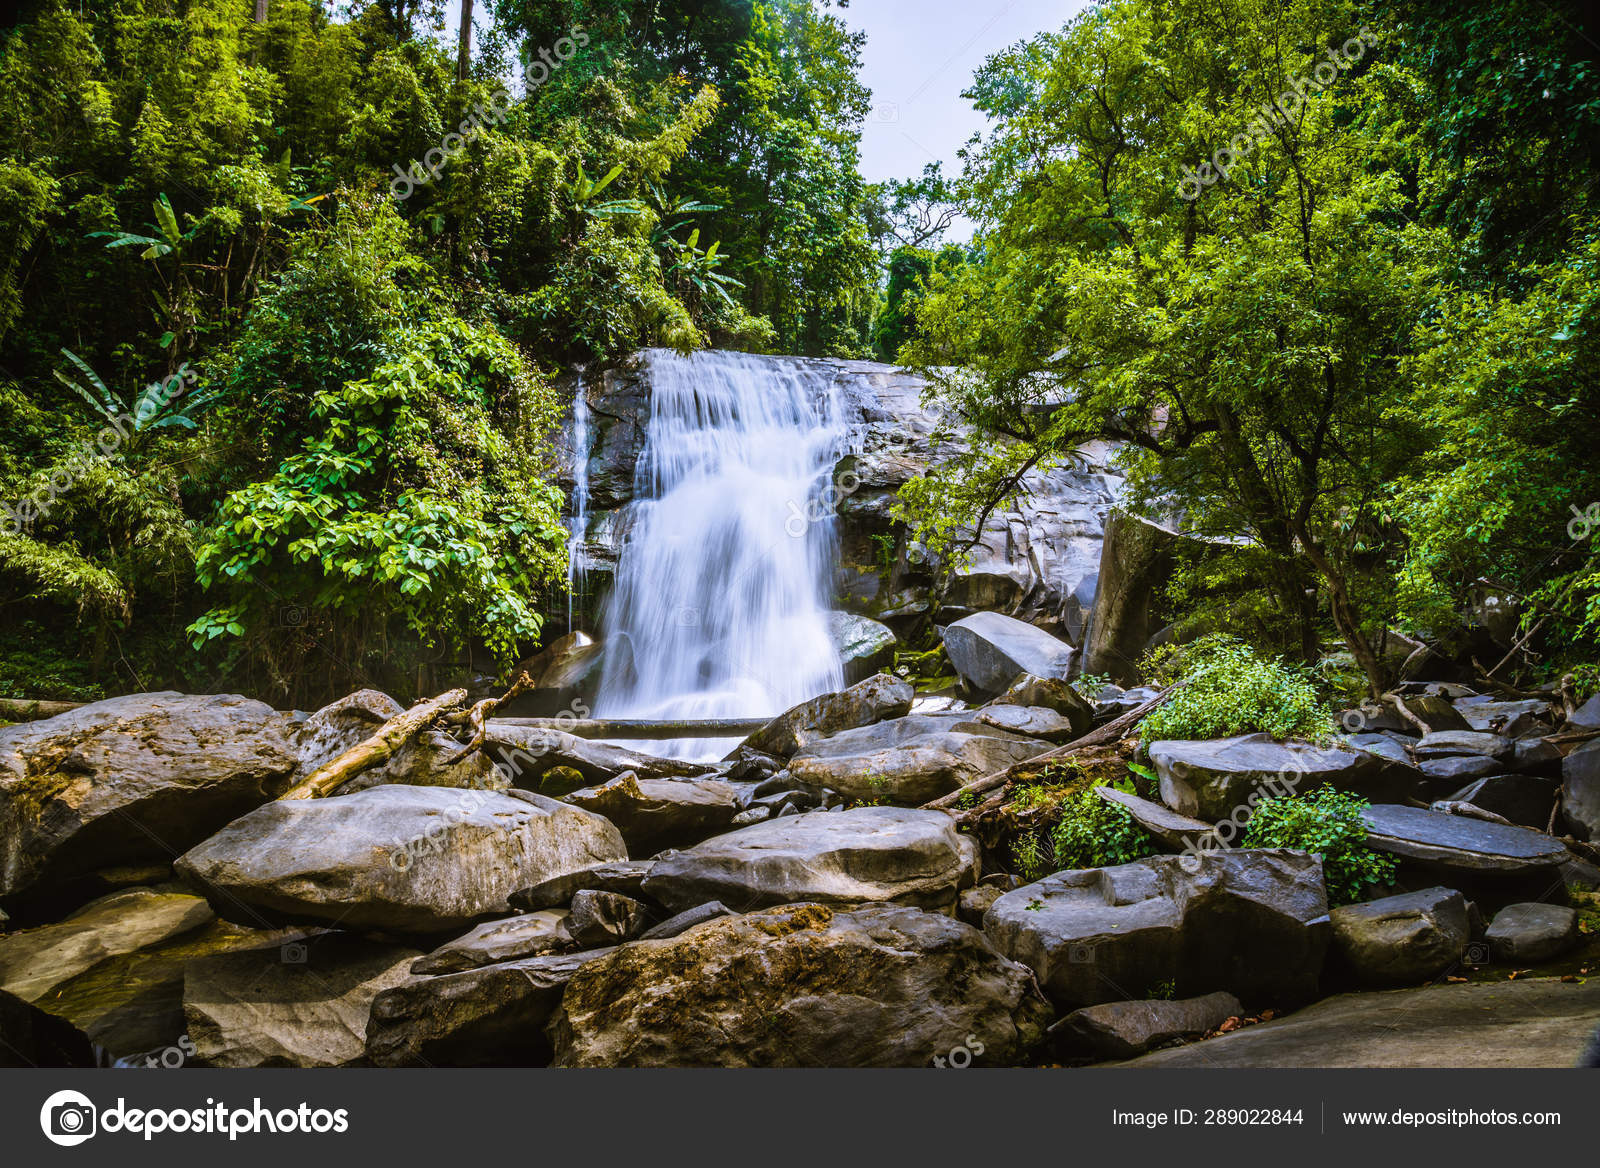 Background Wallpaper Nature Forest Hill Waterfall Thailand Doi Inthanon Travel Nature Travel Relax Siliphum Waterfall Stock Photo C Last19 289022844